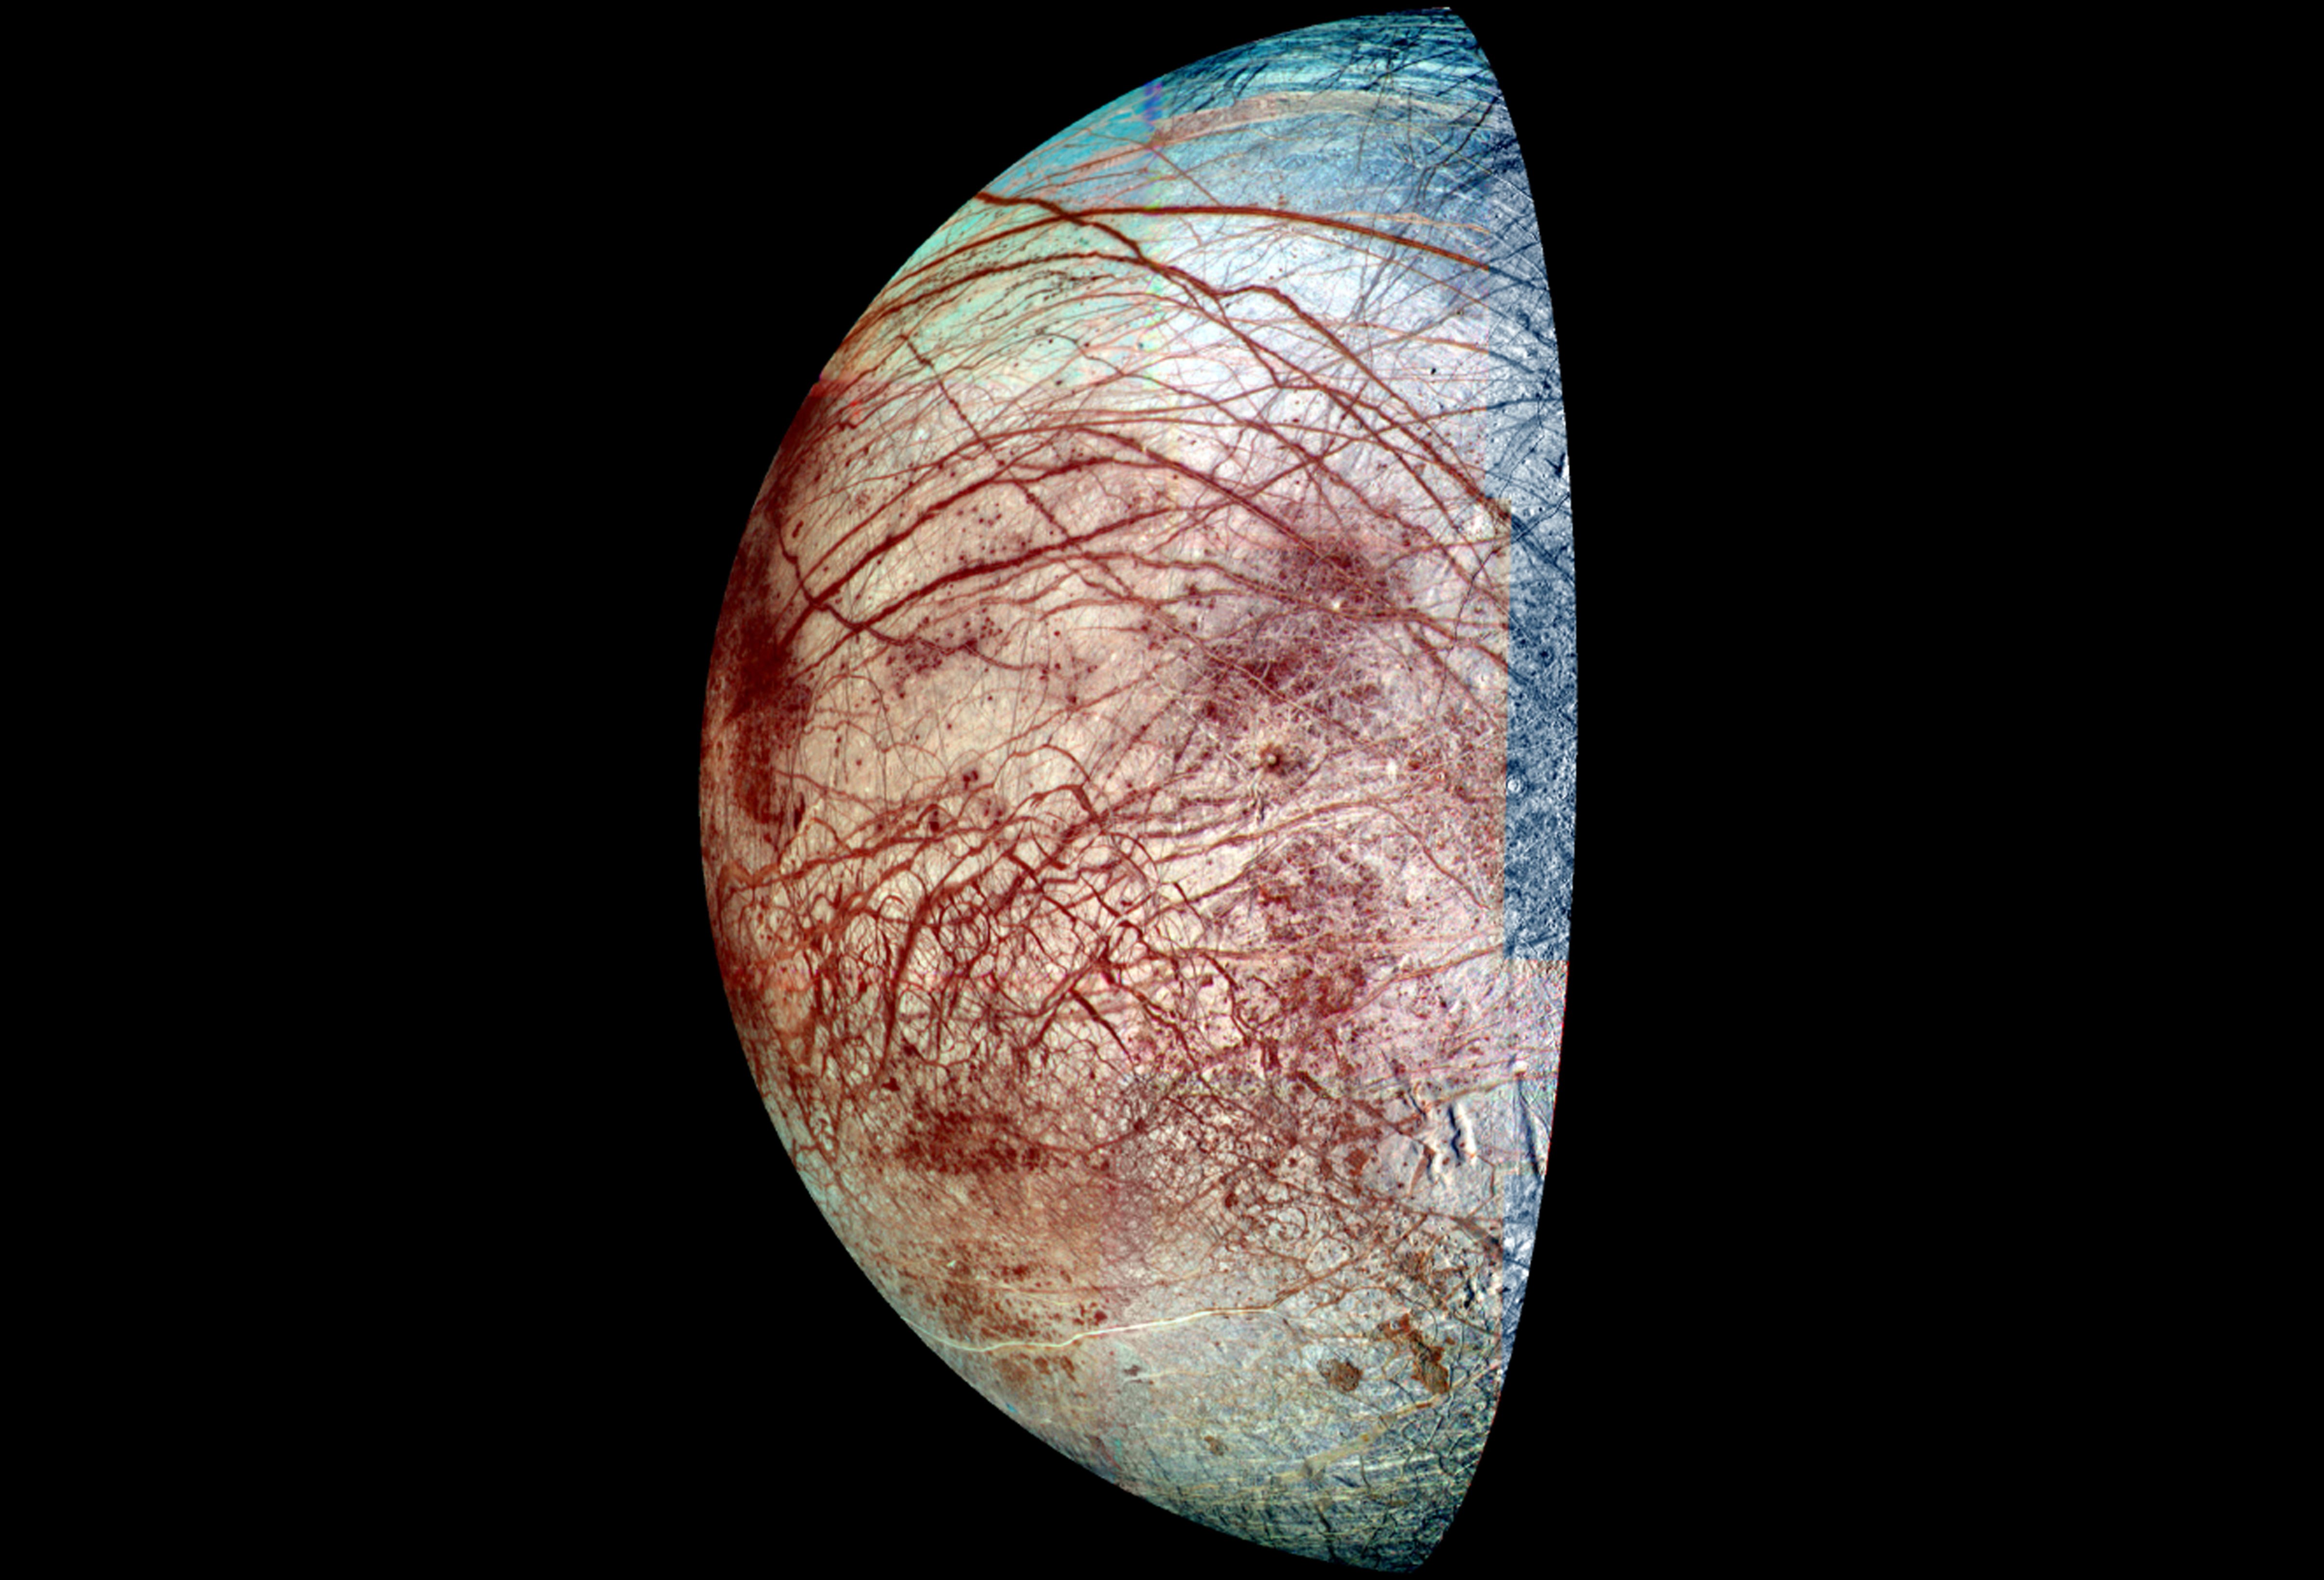 Europa, a moon of Jupiter, from NASA's Galileo spacecraft, which has been orbiting Jupiter since 1995. (Universal History Archive / Getty Images)